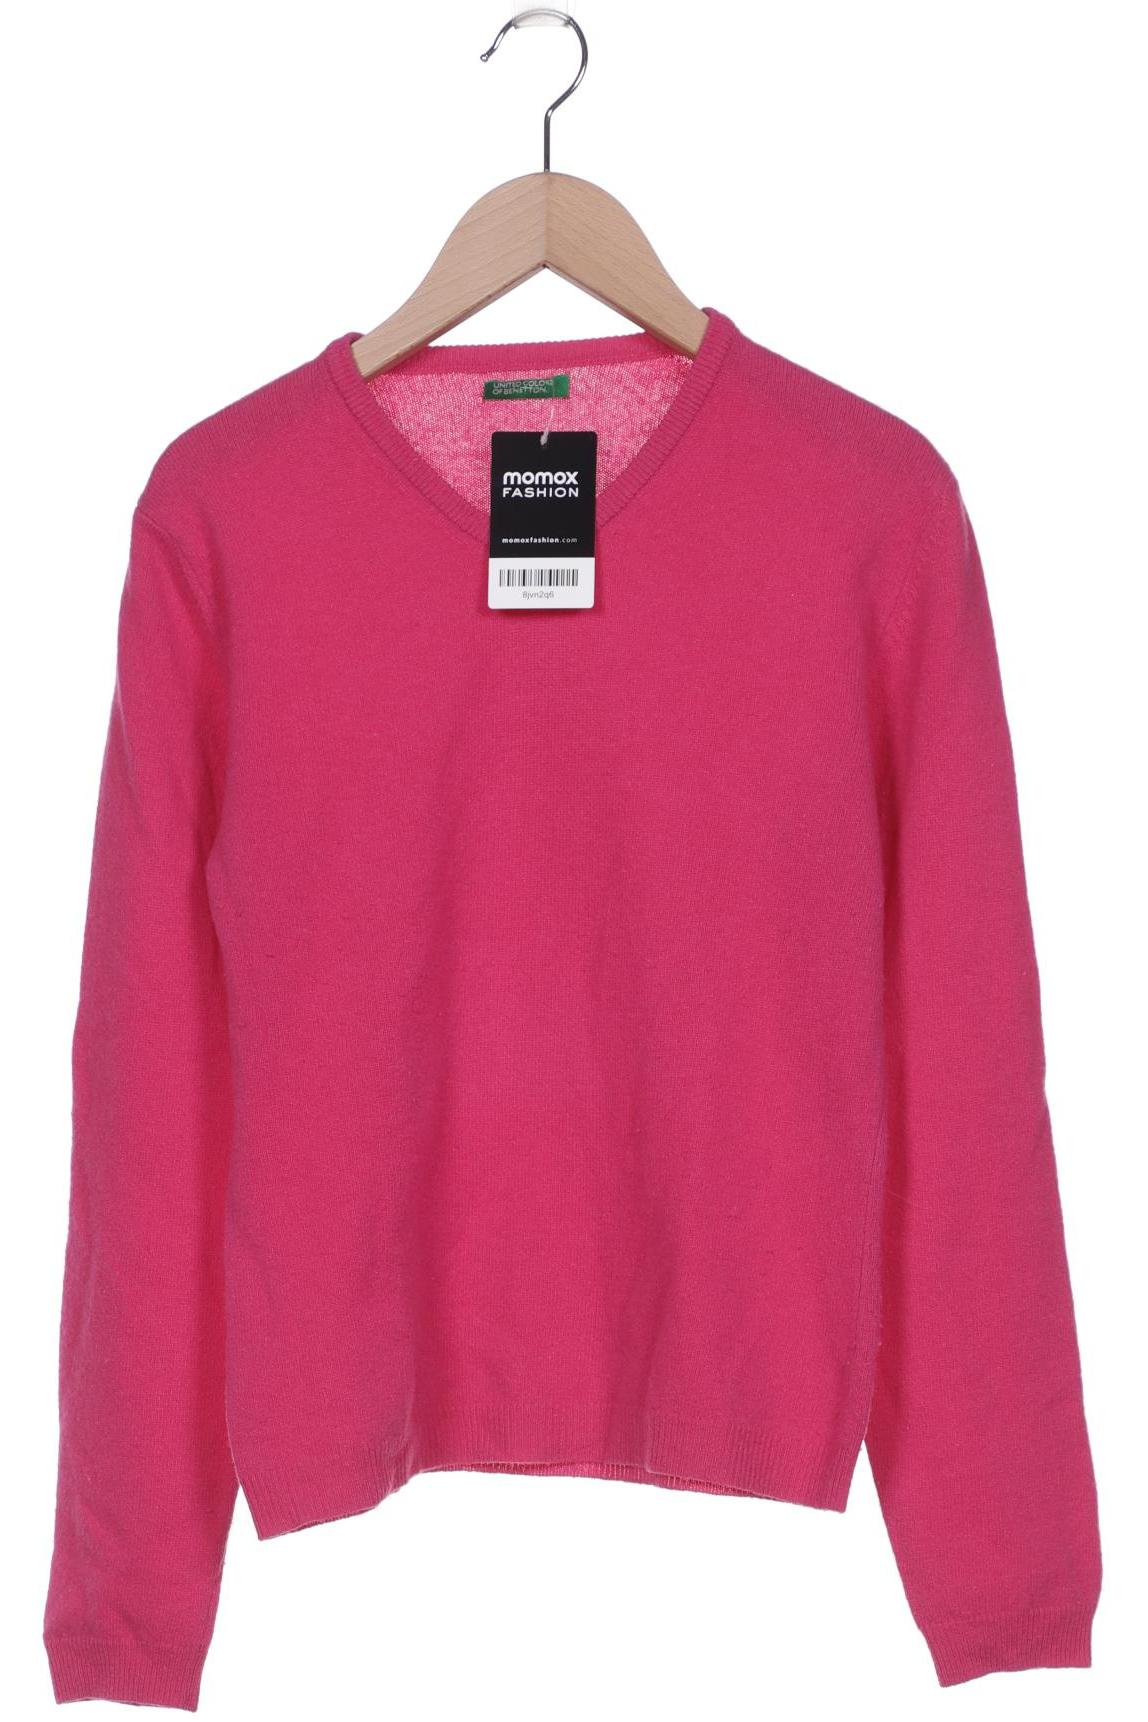 United Colors OF Benetton Damen Pullover, pink, Gr. 36 von United Colors of Benetton